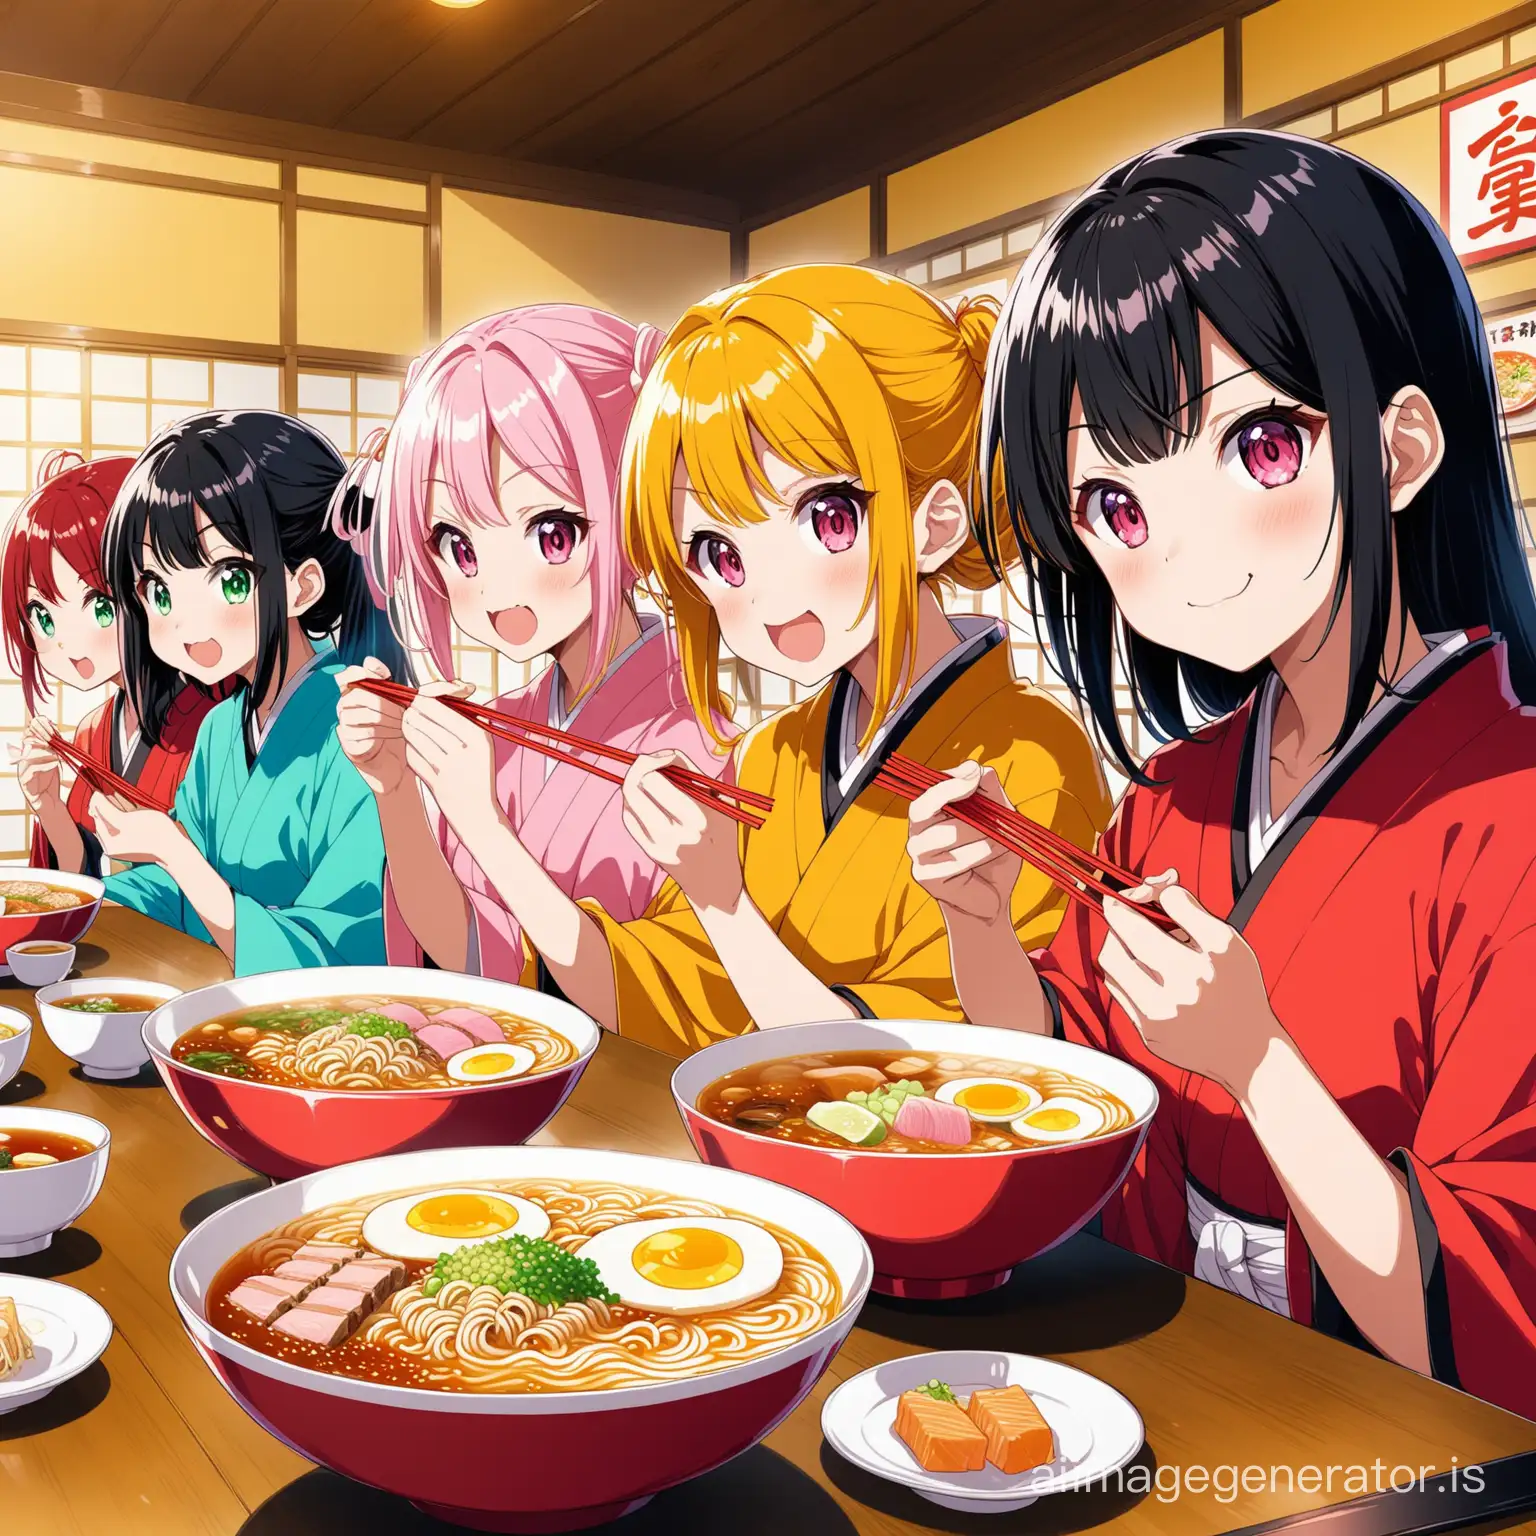 famous anime characters eating ramen in a colorful Japanese restaurant